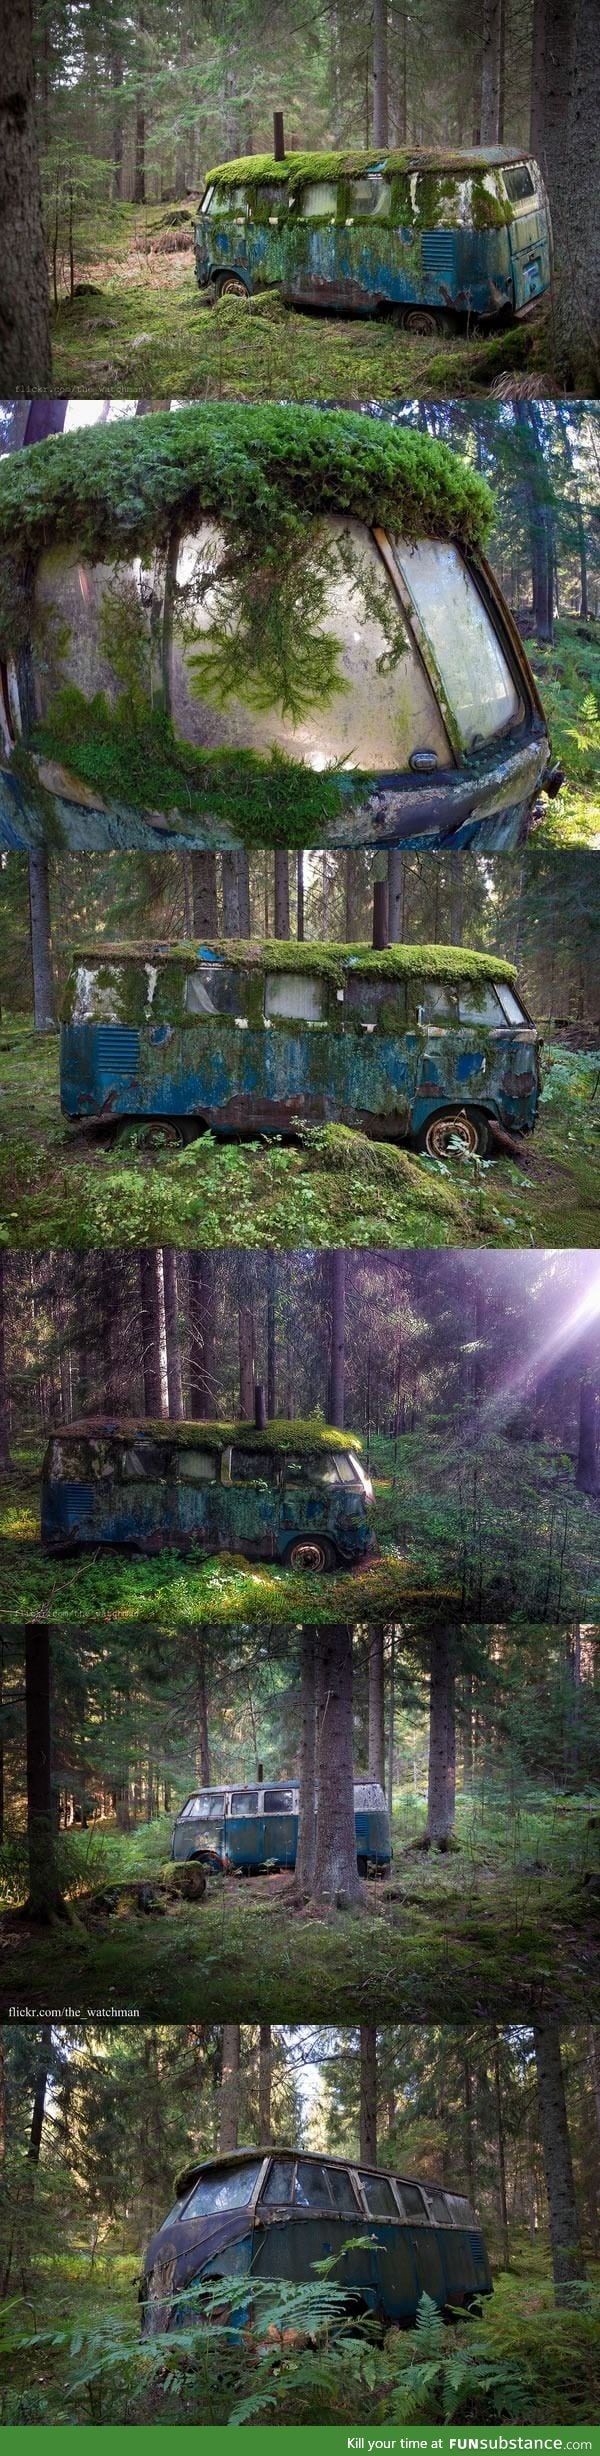 Abandoned VW bus that was once someone's home, deep in the forests of Norway